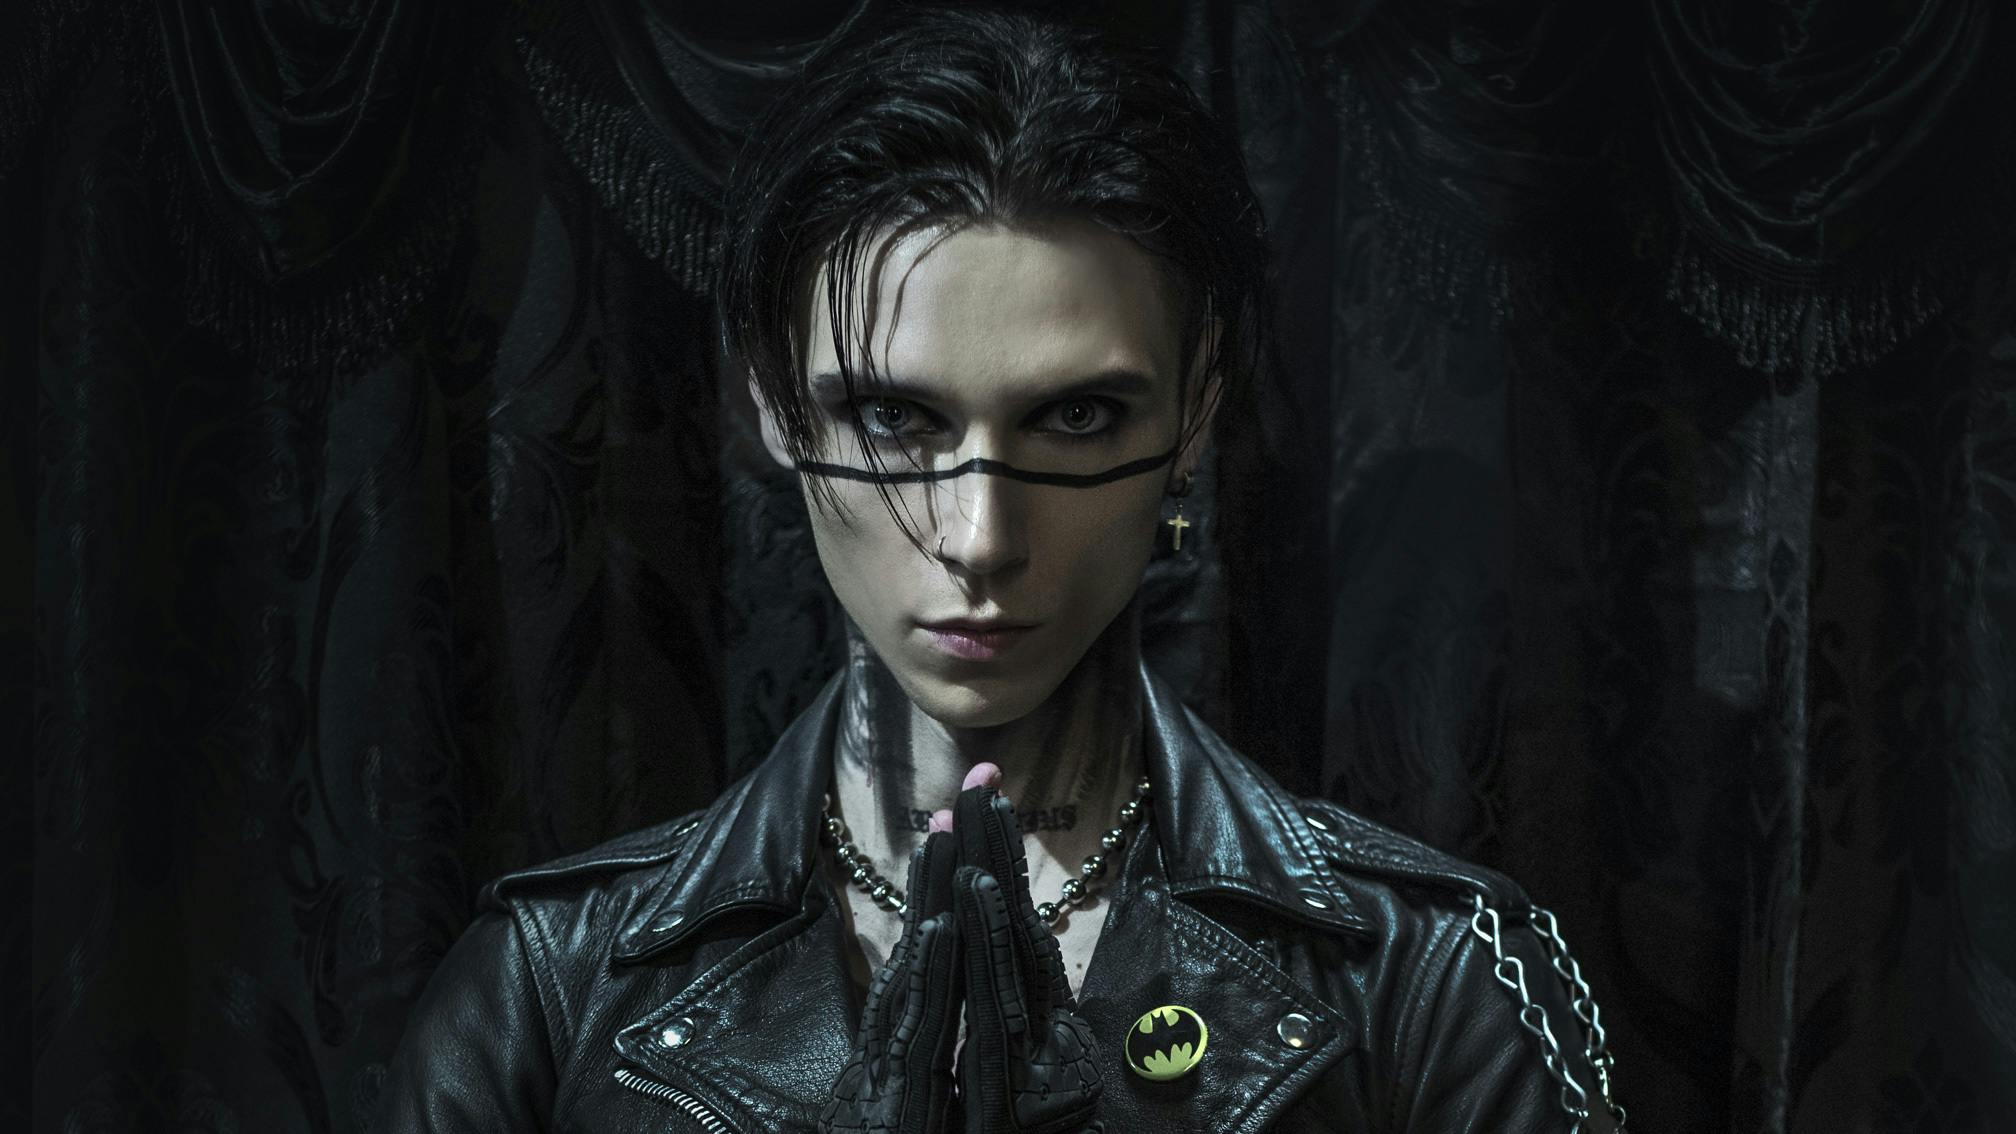 "You’re Going To Be Happy If You Just Remain True To Who You Are": Andy Biersack Writes A Letter To His Younger Self